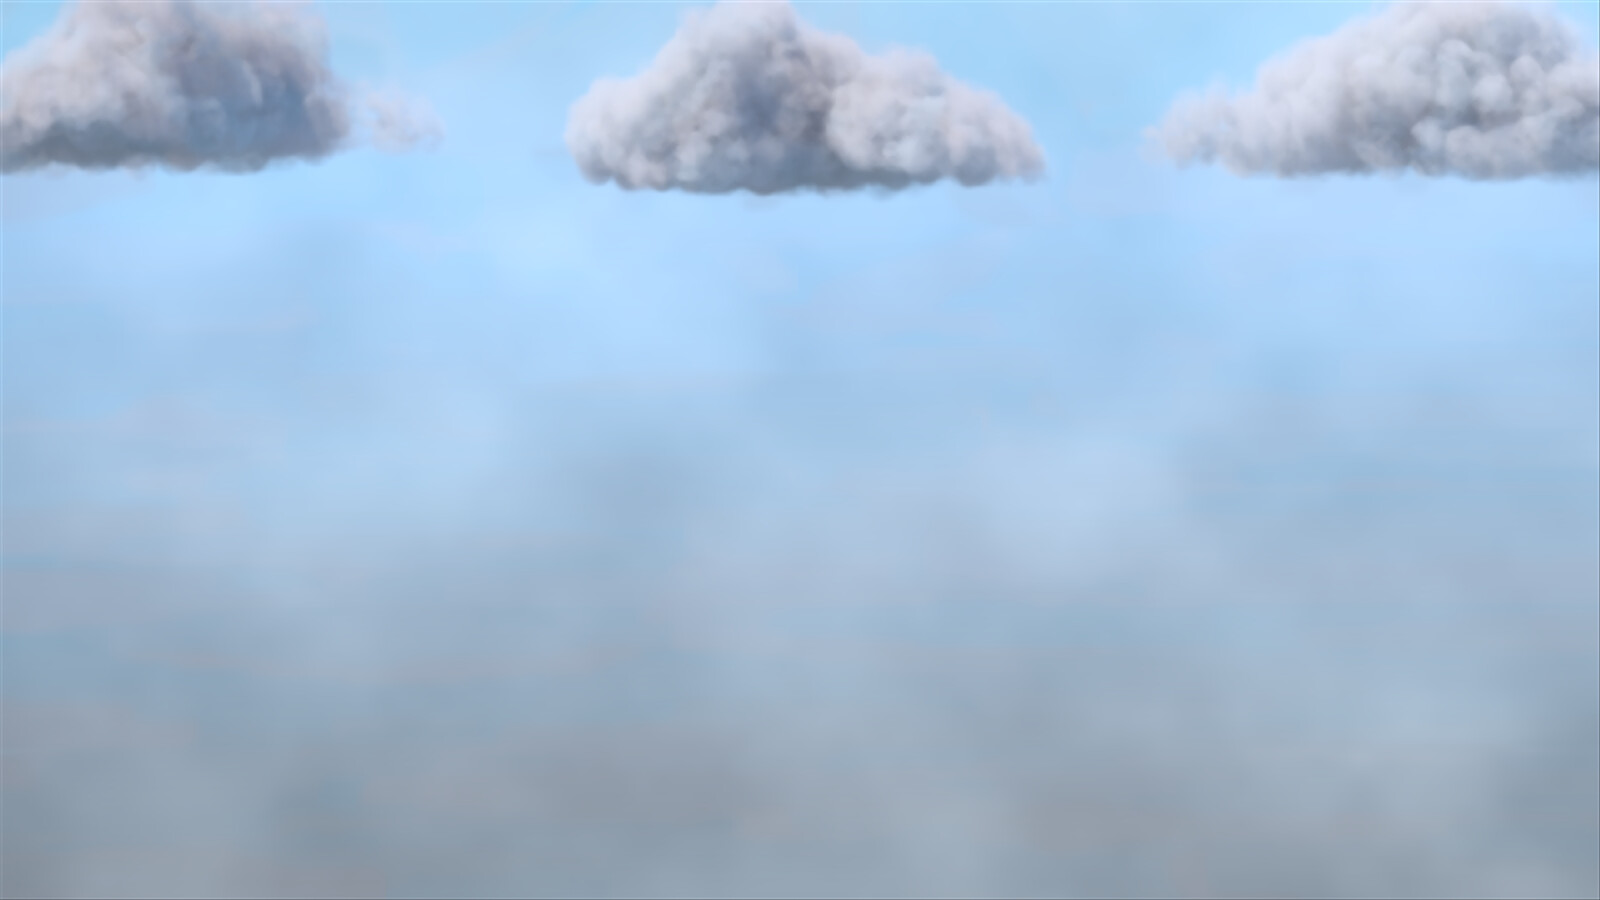 The volumetric clouds are still a bit of a challenge. Wet-on-wet is the most common way of painting clouds, and simulating this effect can be tricky for a 3D render. I am still working on a new method for clouds.